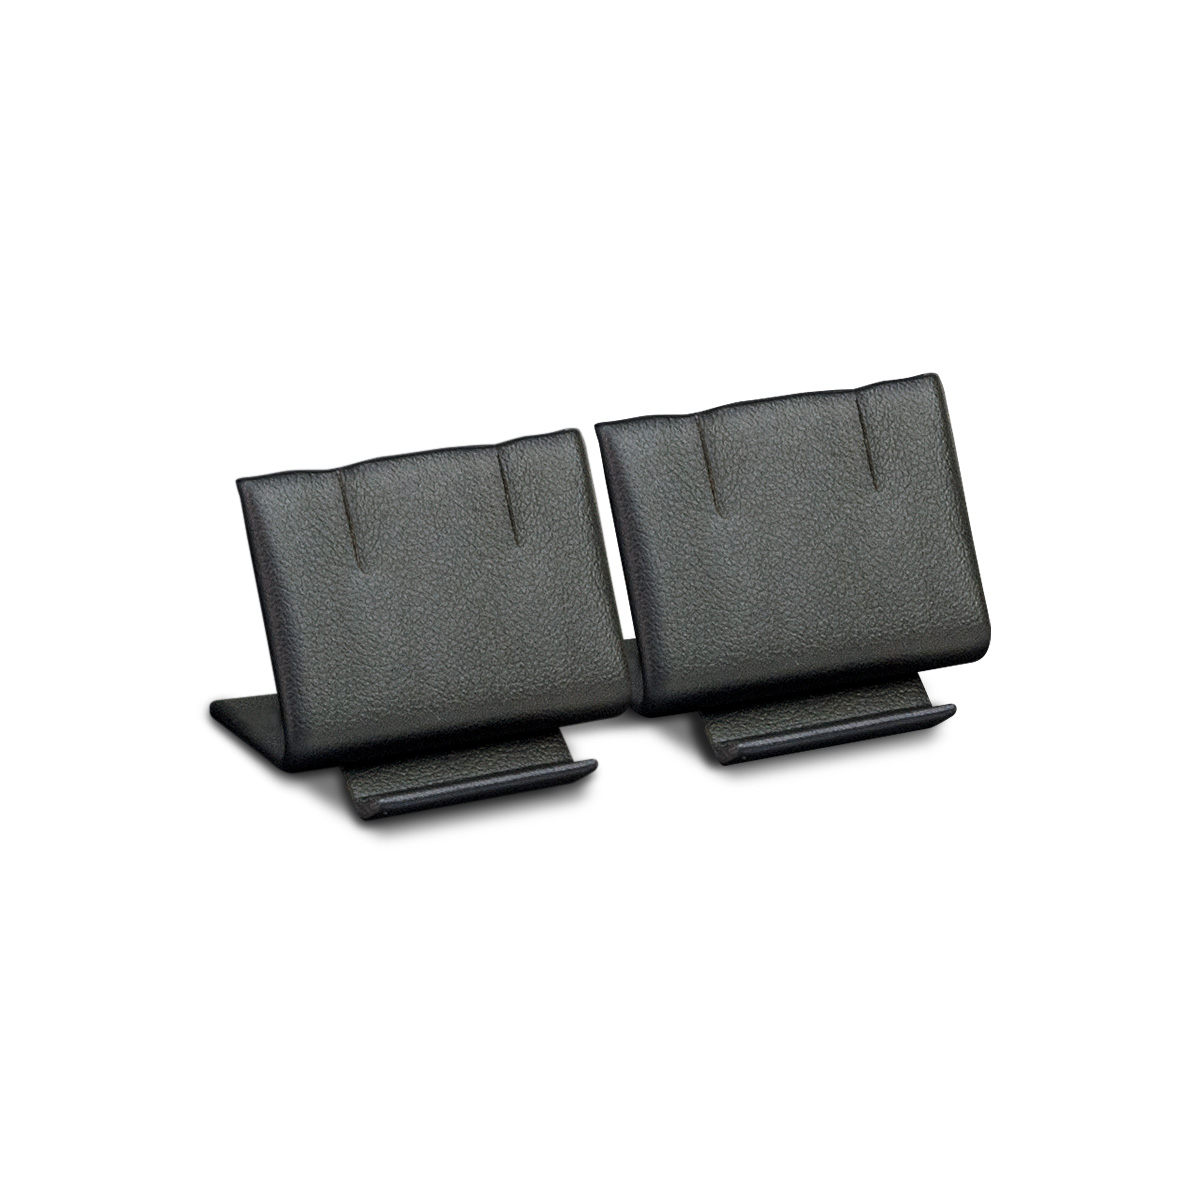 Double presentation display for earrings, low, smooth leather imitation, black, LxWxD ca. 3,0 x 7,0 x 3,0 cm